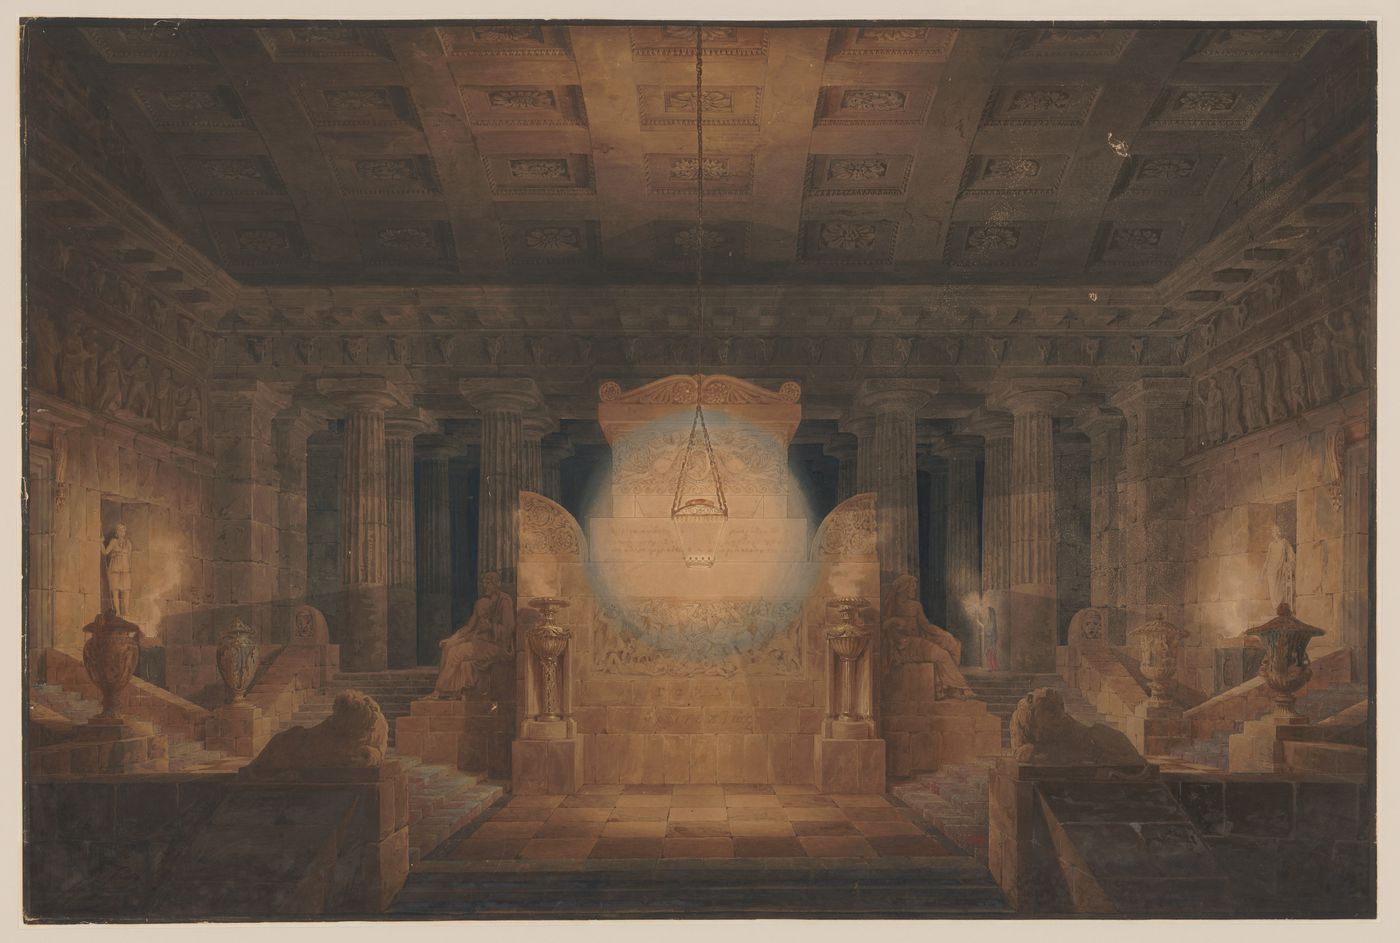 Perspective of the Interior of a Funerary Chamber / Perspective de l'intérieur d'une crypte